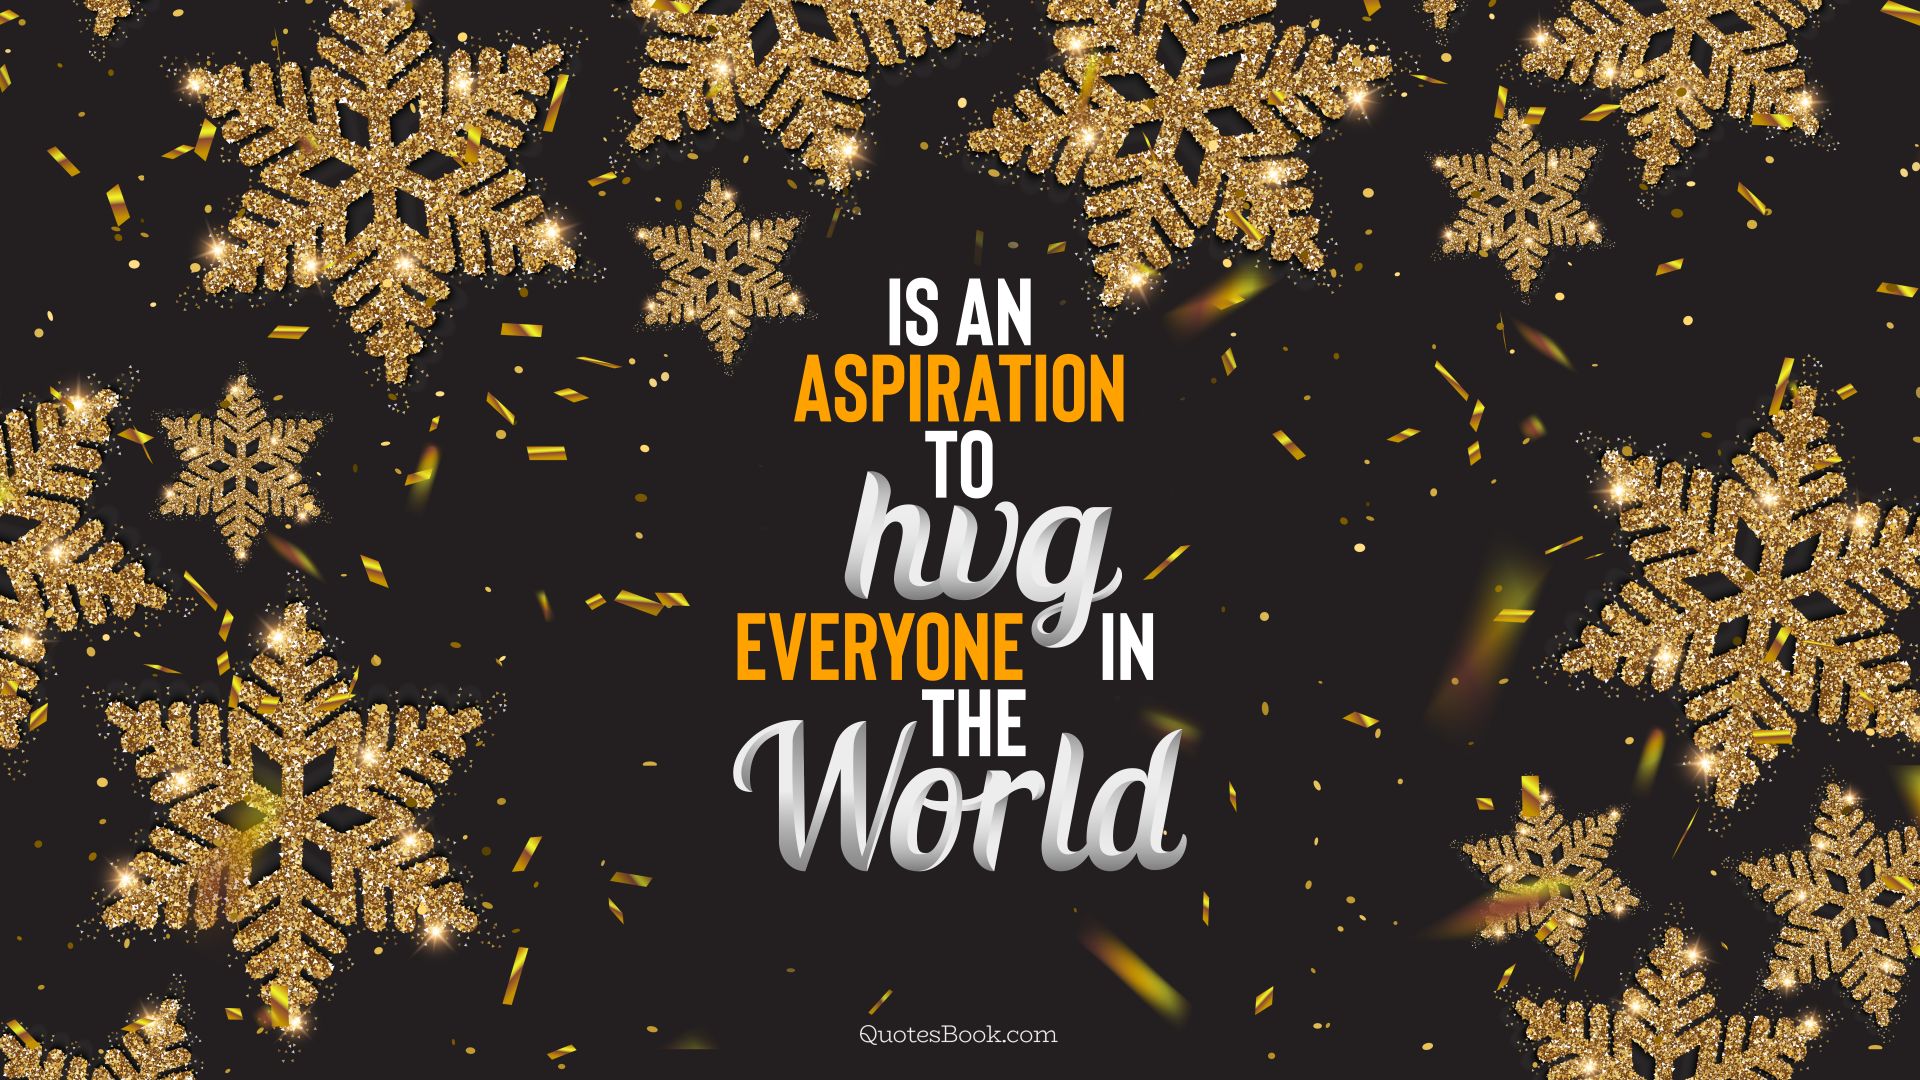 Christmas is an aspiration to hug everyone in the world. - Quote by QuotesBook